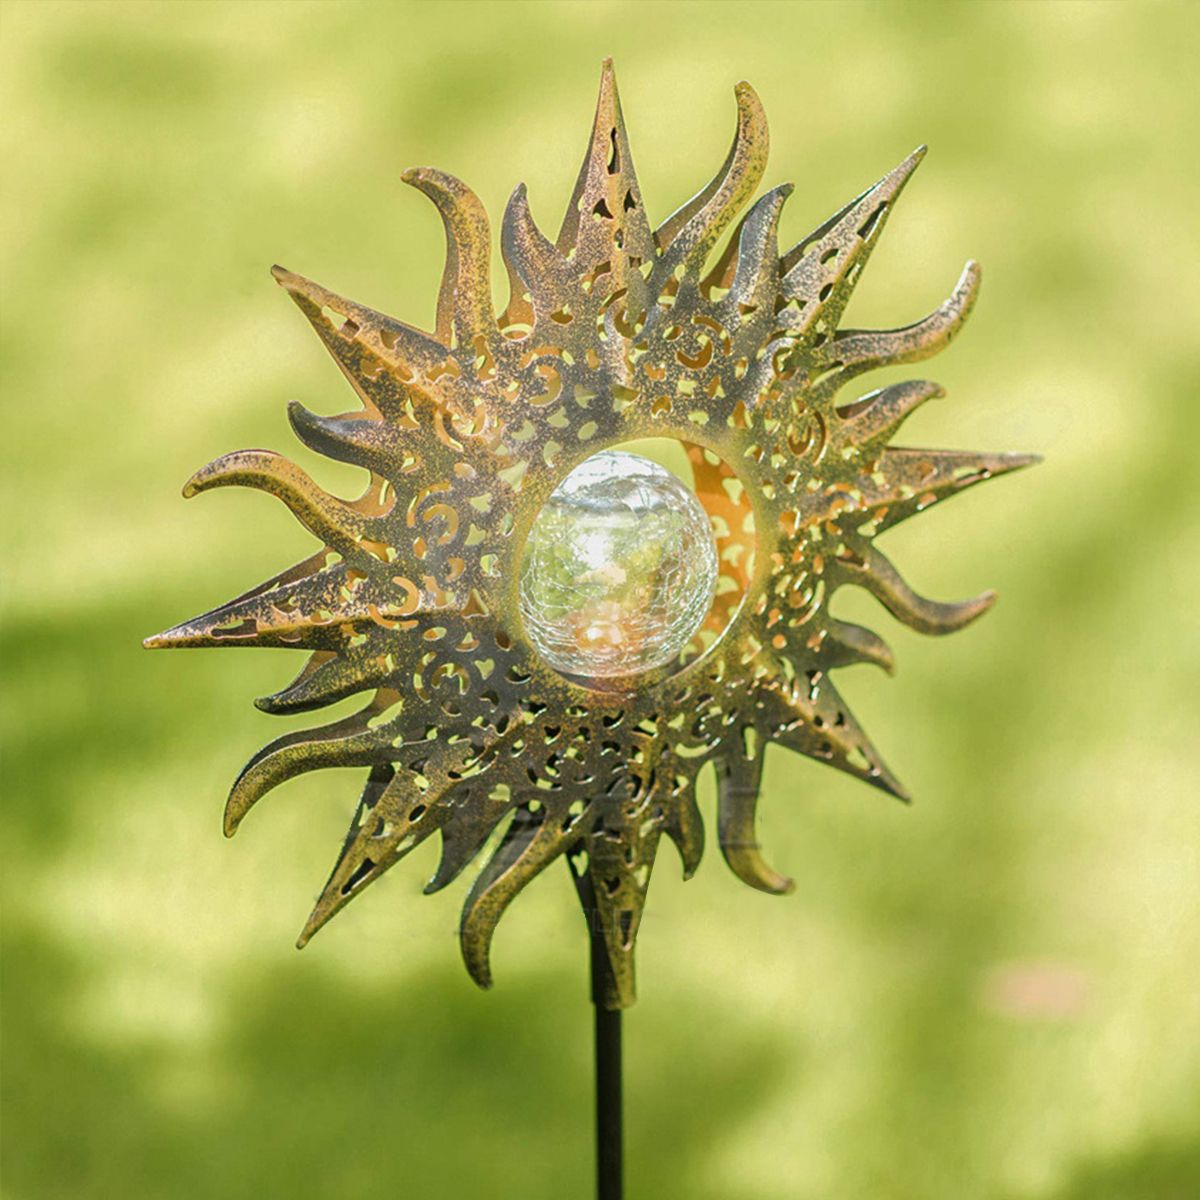 Solar-Powered-LED-Stake-Lawn-Light-Sunflower-Waterproof-Patio-Outdoor-Garden-Path-Lamp-1707064